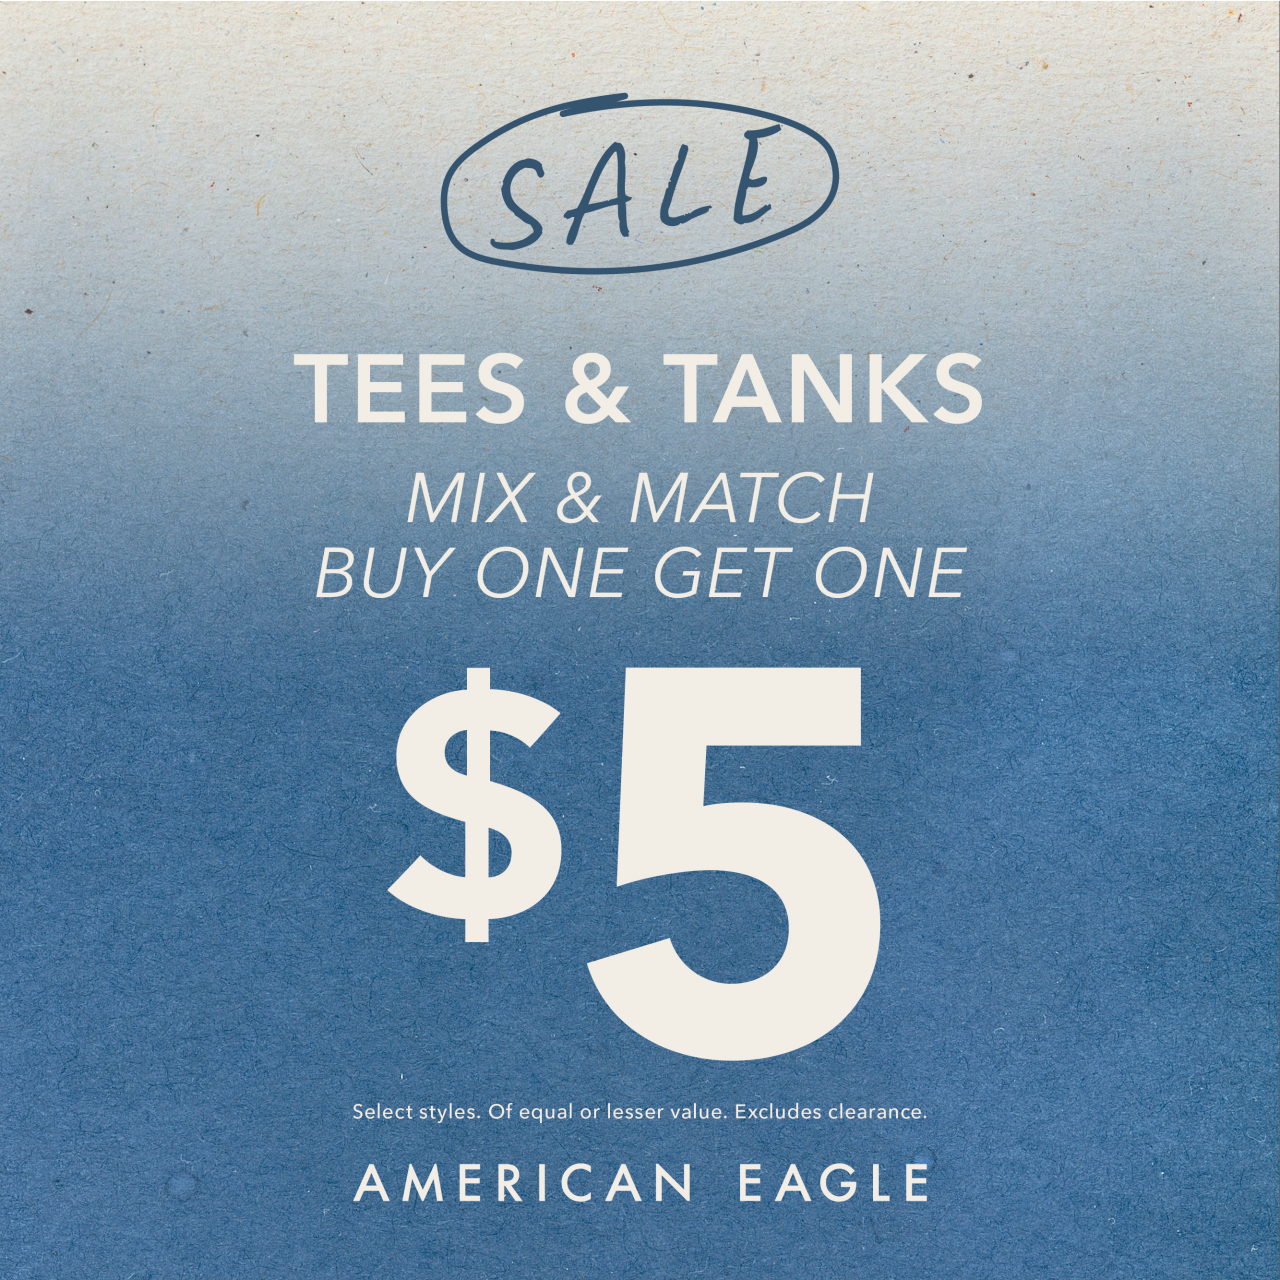 American Eagle Outfitters Campaign 69 American Eagle Tees Tanks Buy One Get One for 5 EN 1280x1280 1